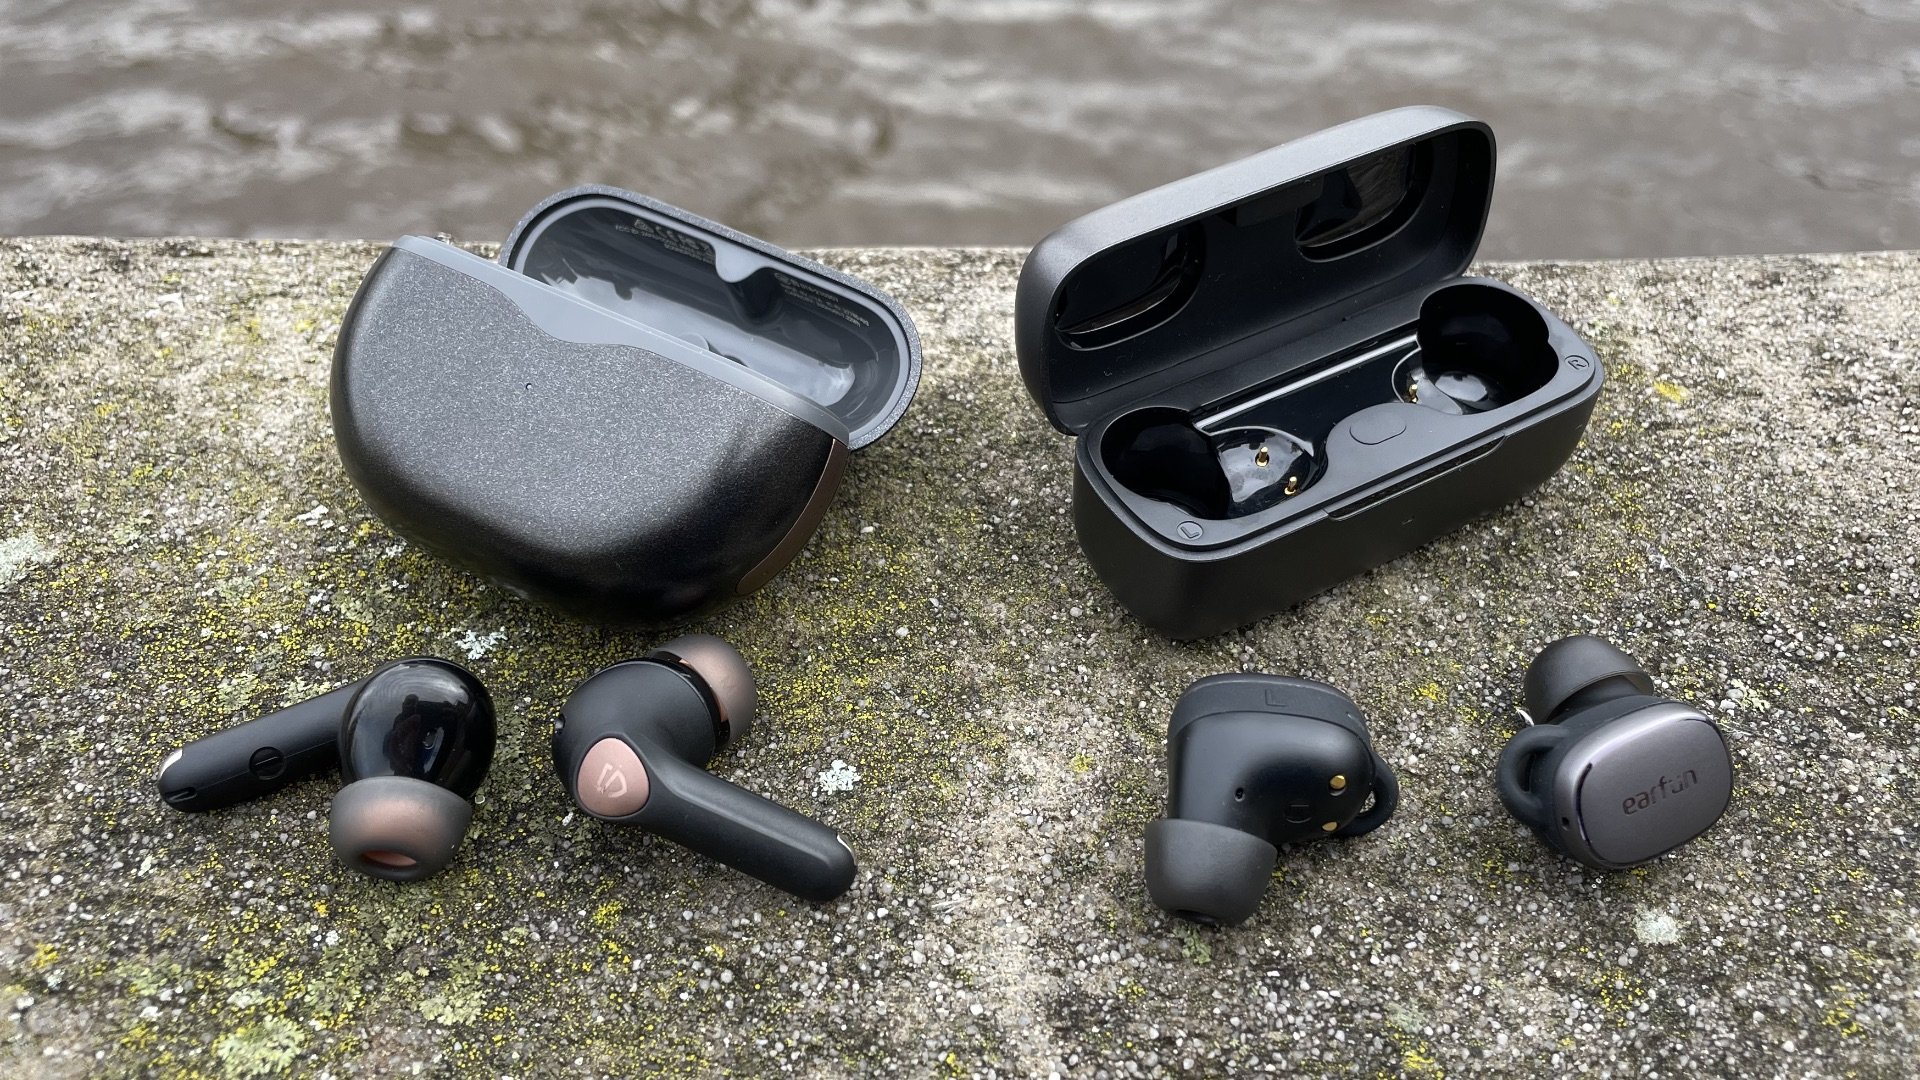 Hands-on review: Soundpeats Air4 Pro Wireless Earbuds